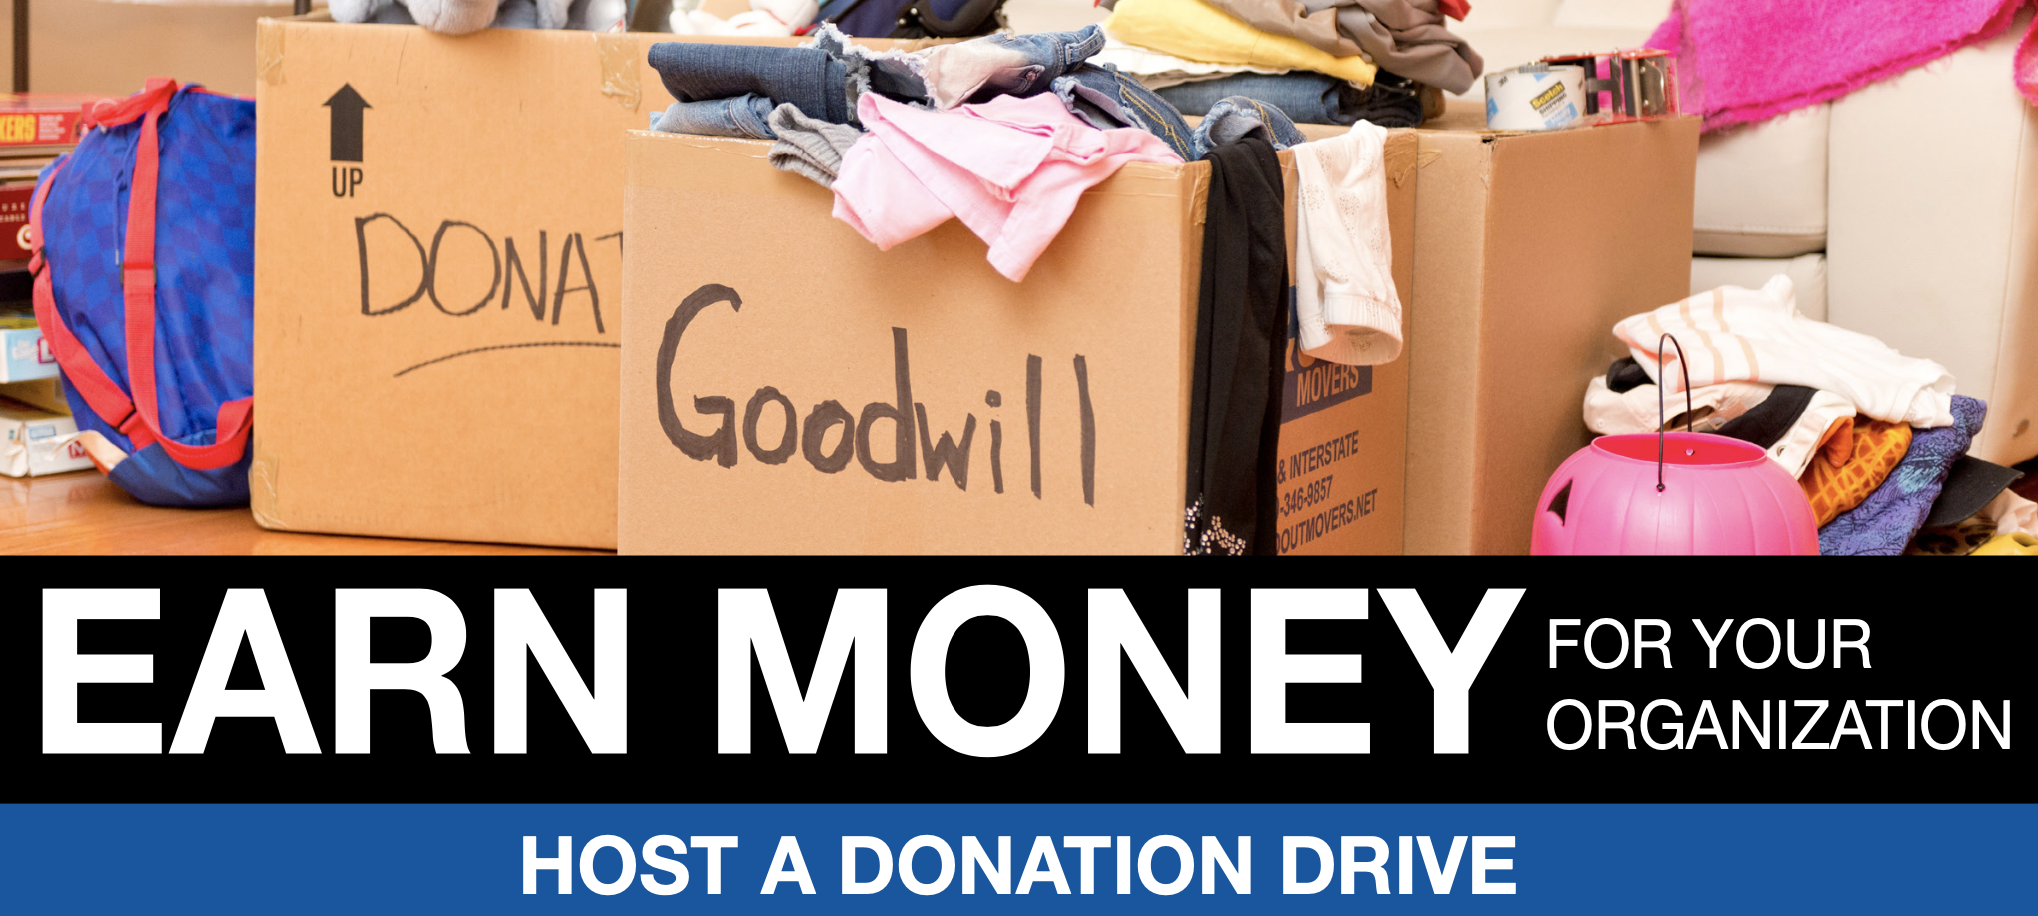 Change Lives & Earn Money with a Goodwill Donation Drive